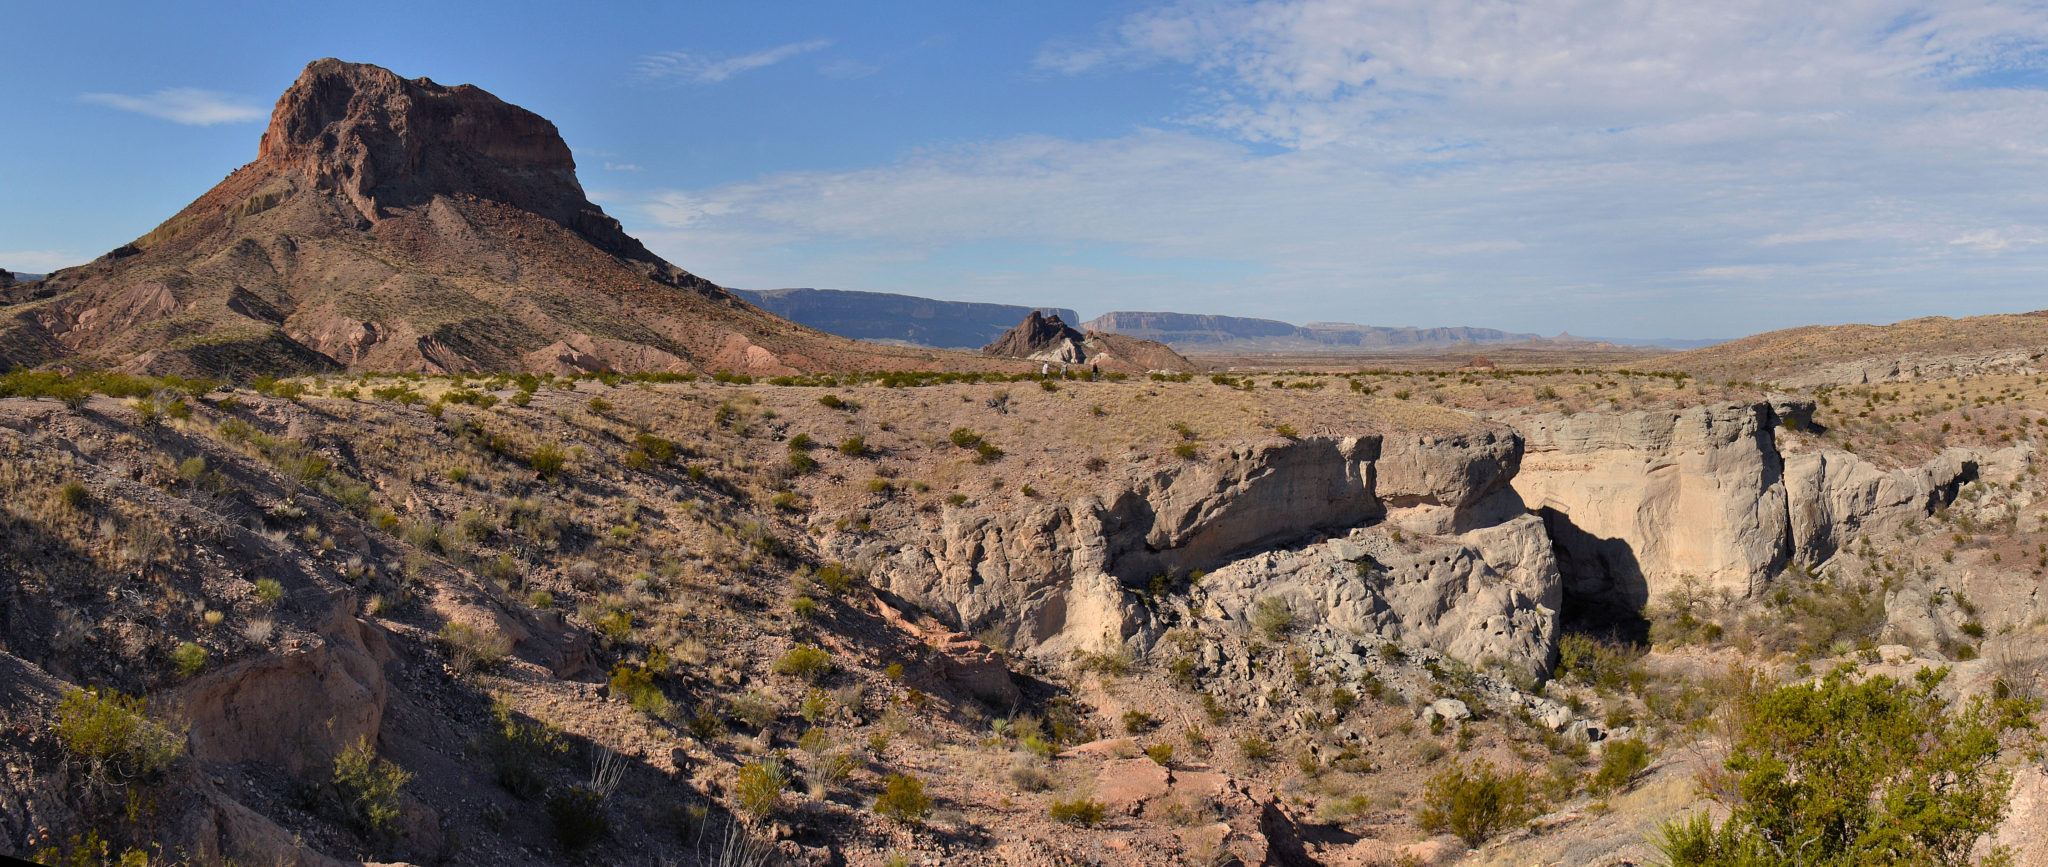 Tuff Canyon in Big Bend National Park